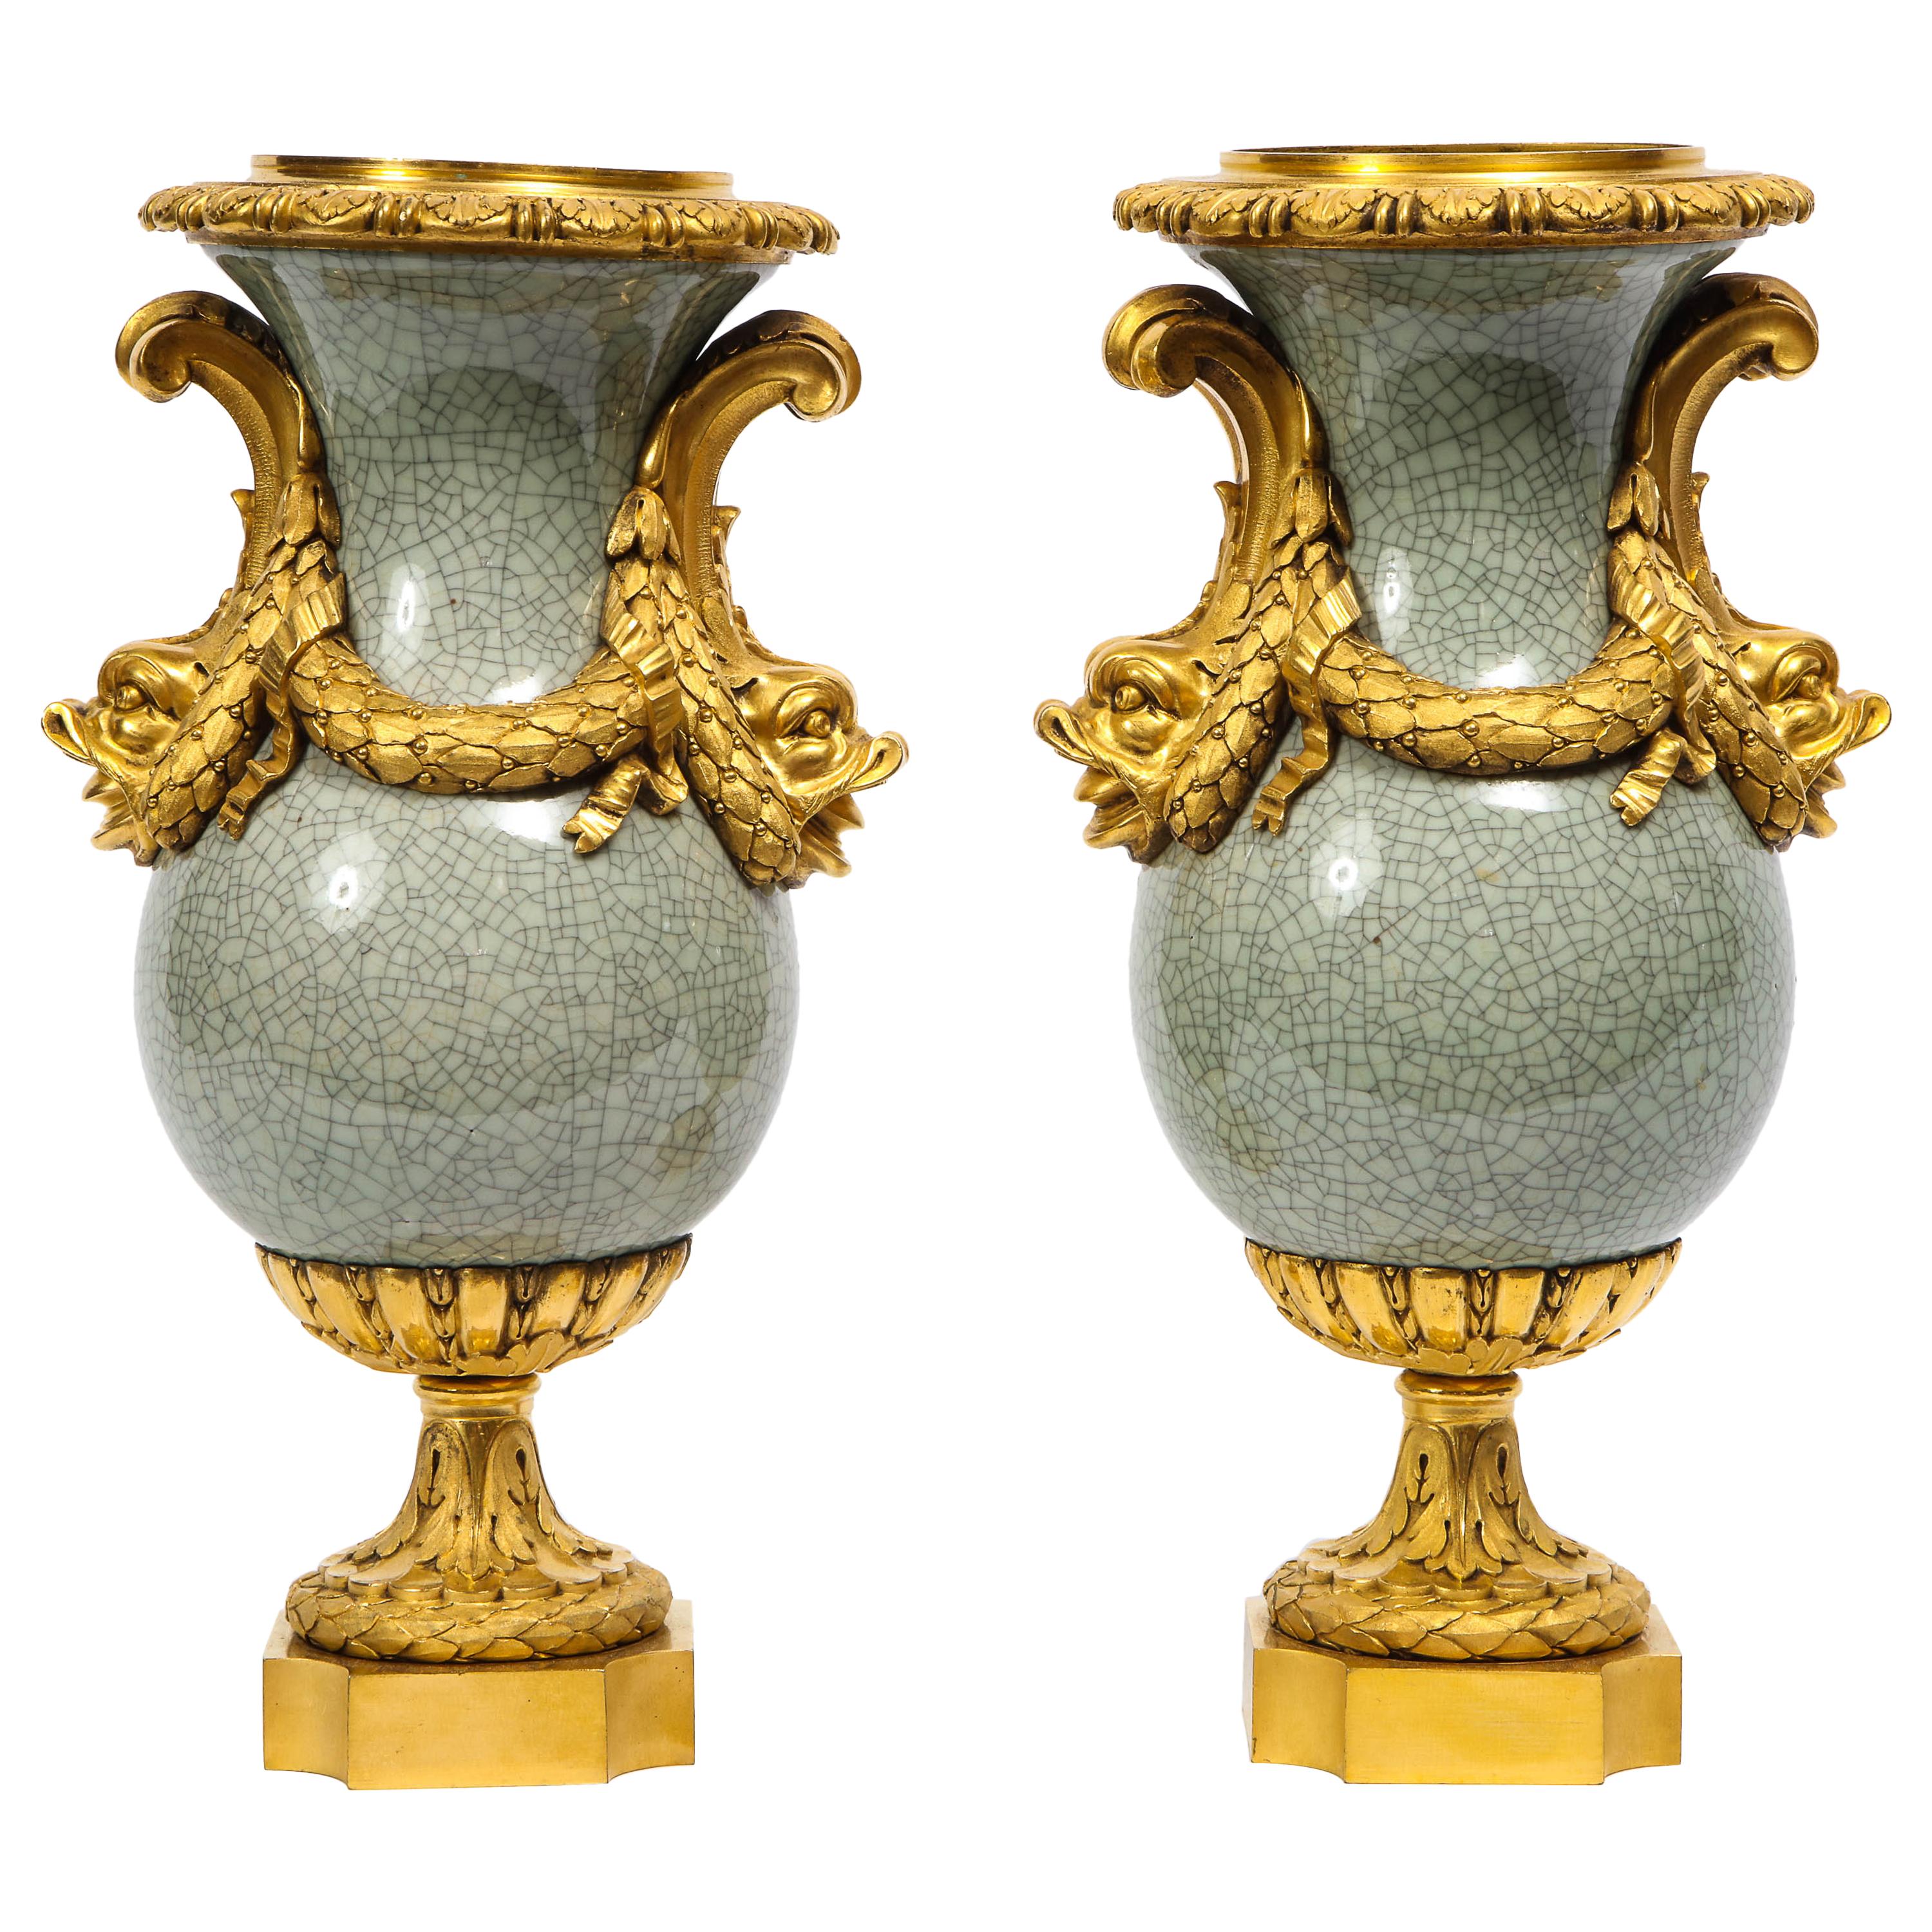 Louis XVI Ormolu-Mounted Chinese Celadon Crackle Vases with Dolphin Handles For Sale